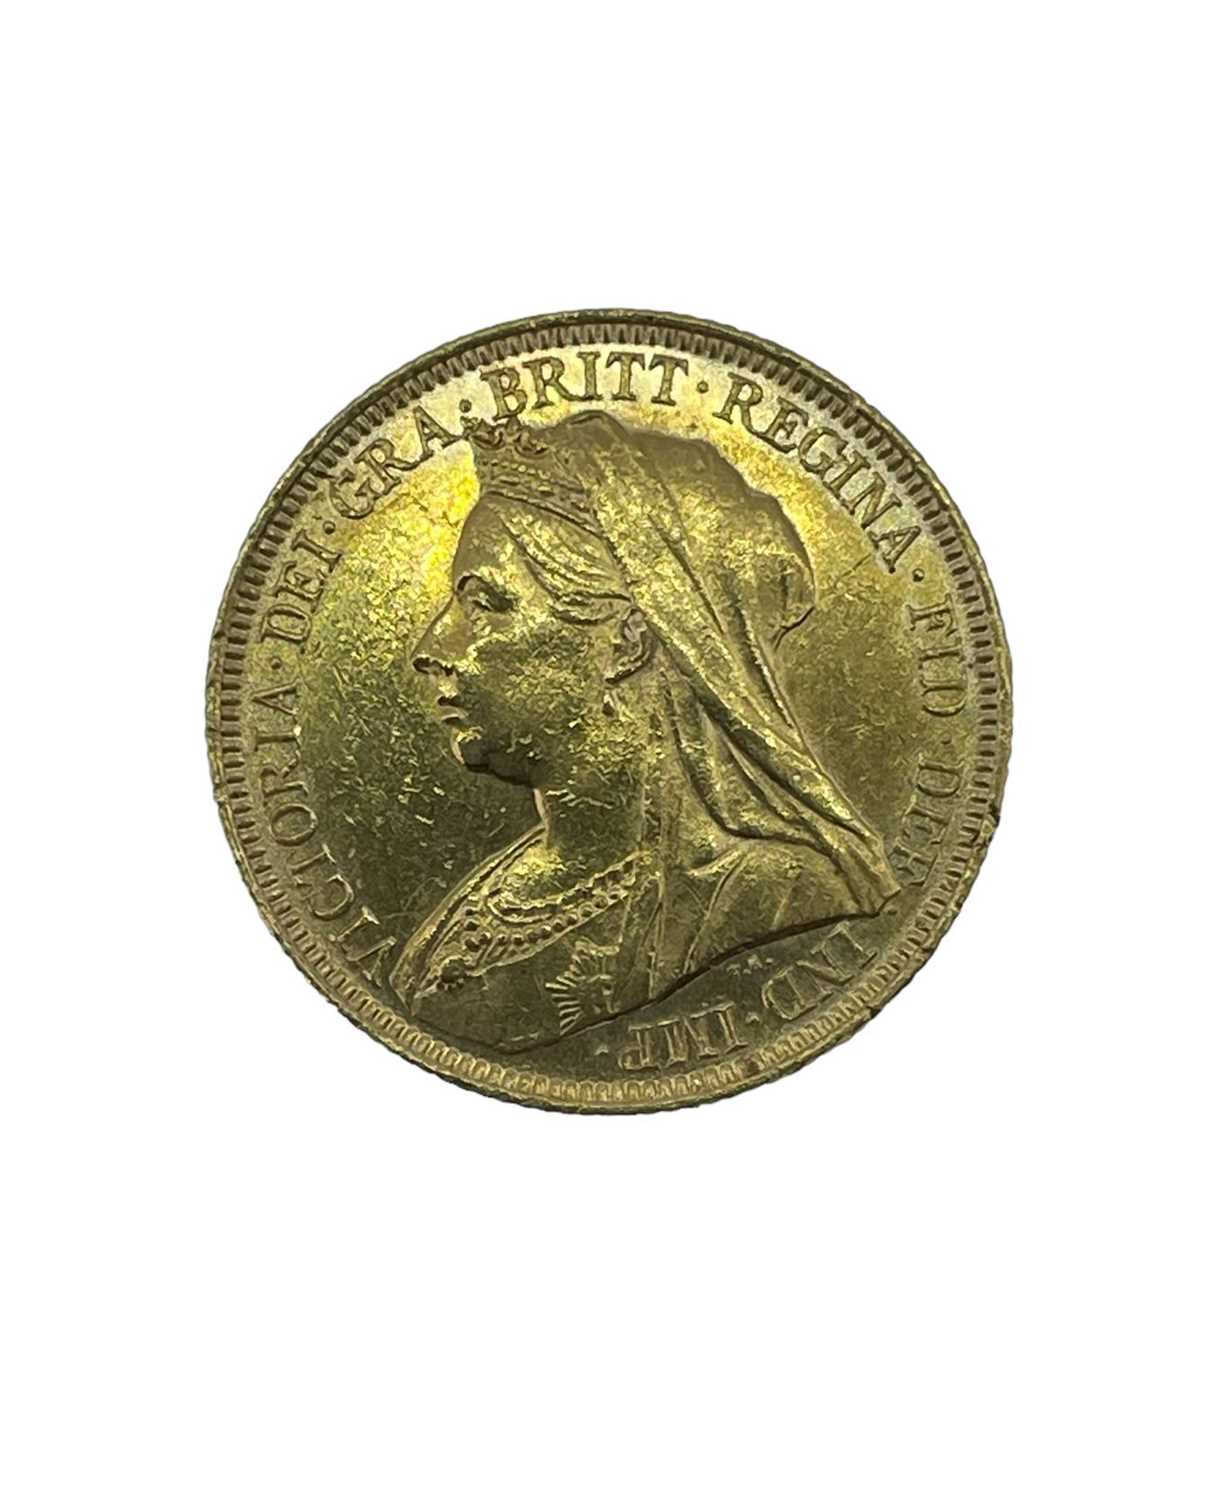 VICTORIAN GOLD SOVEREIGN, 1896, Old (veiled) head, 7.9gms Provenance: private collection - Image 2 of 2